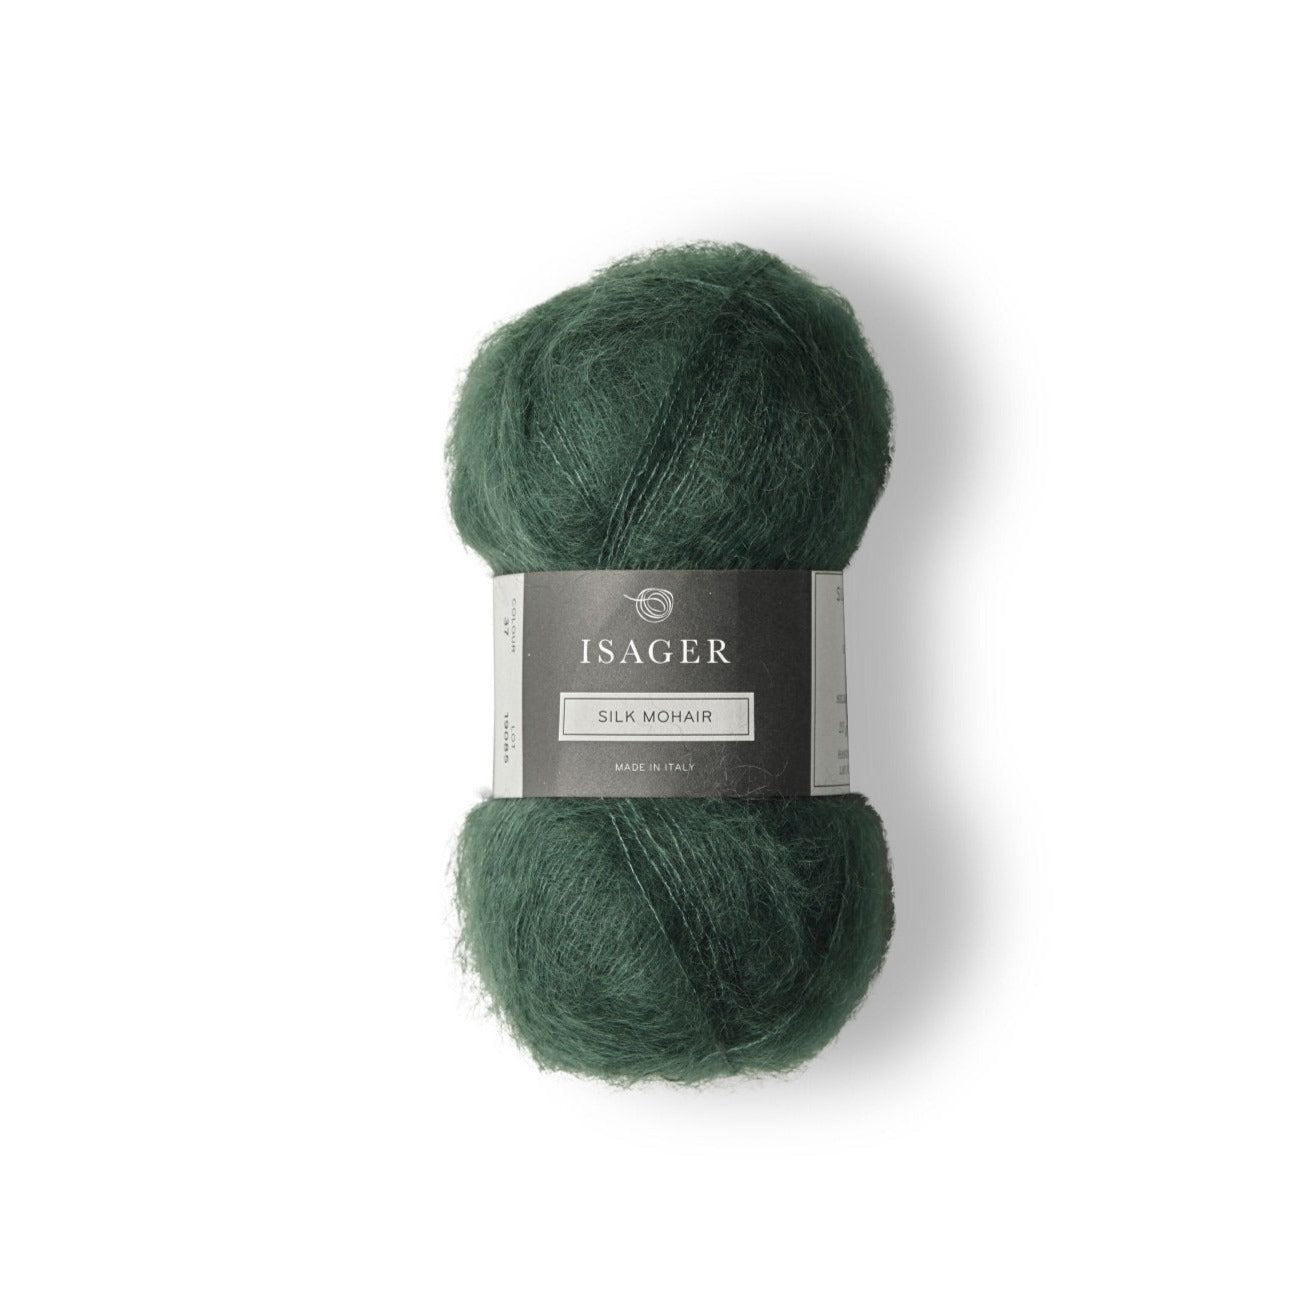 Isager Silk Mohair - 37 - 2 Ply - Isager - The Little Yarn Store